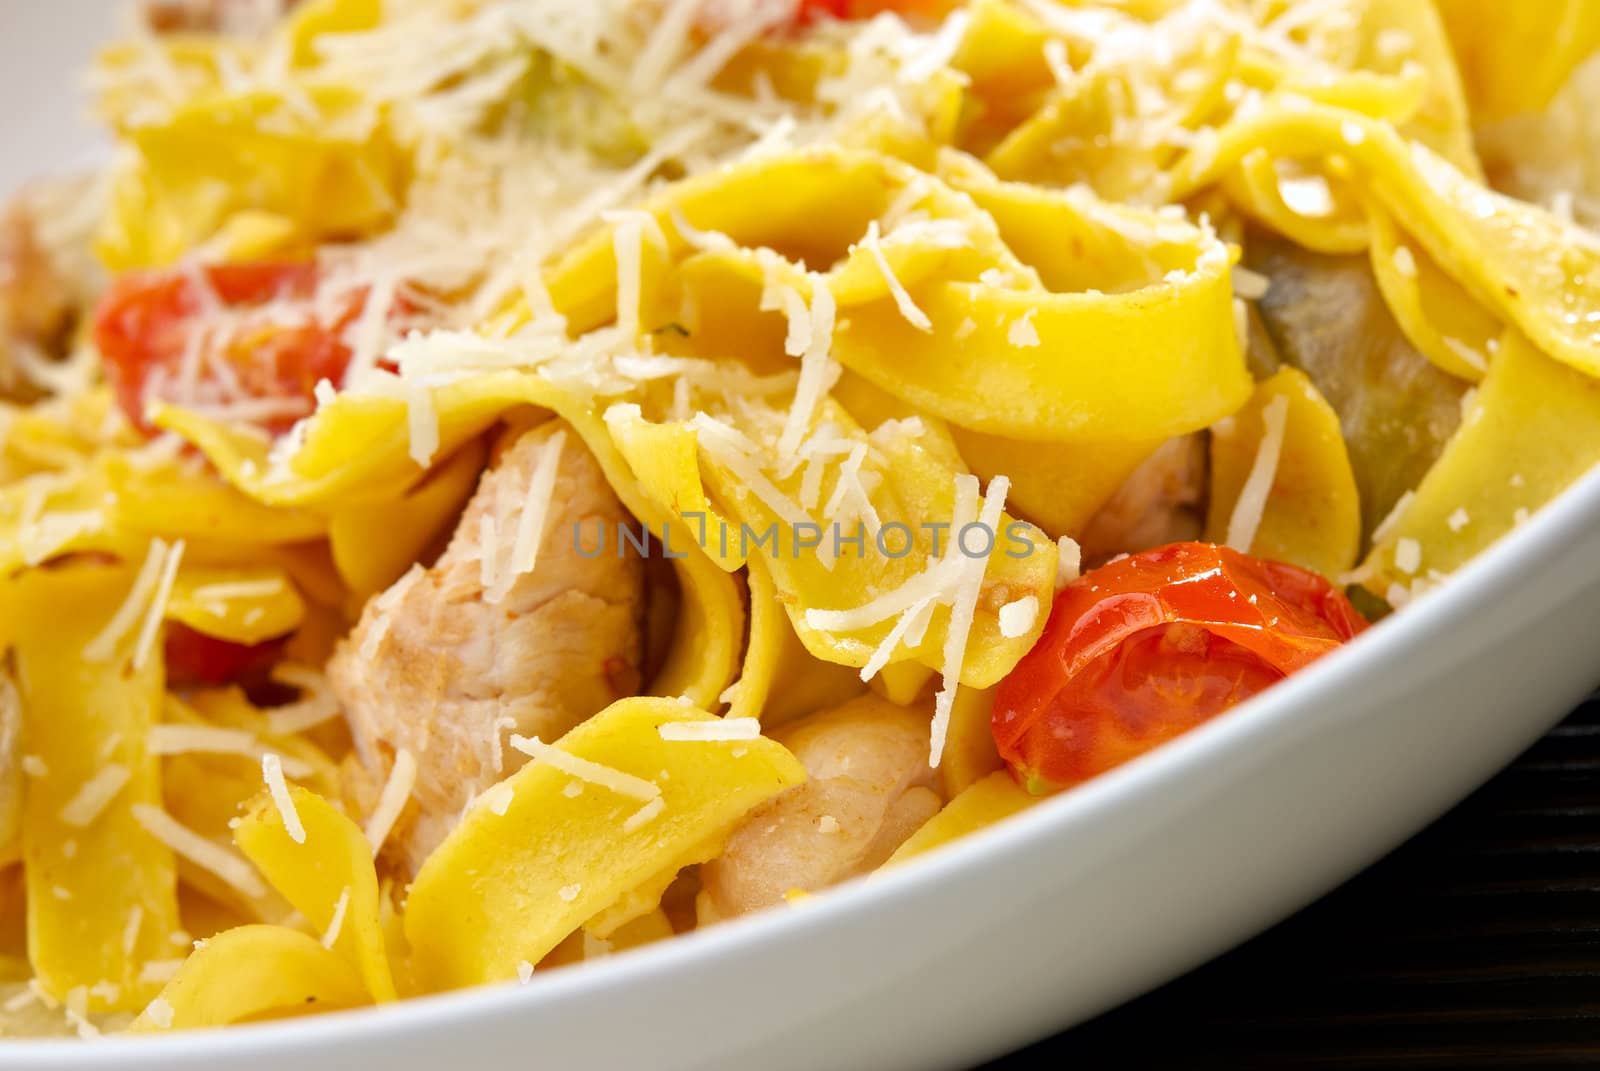 Spaghetti pasta with cheese, chicken and tomato by kirs-ua